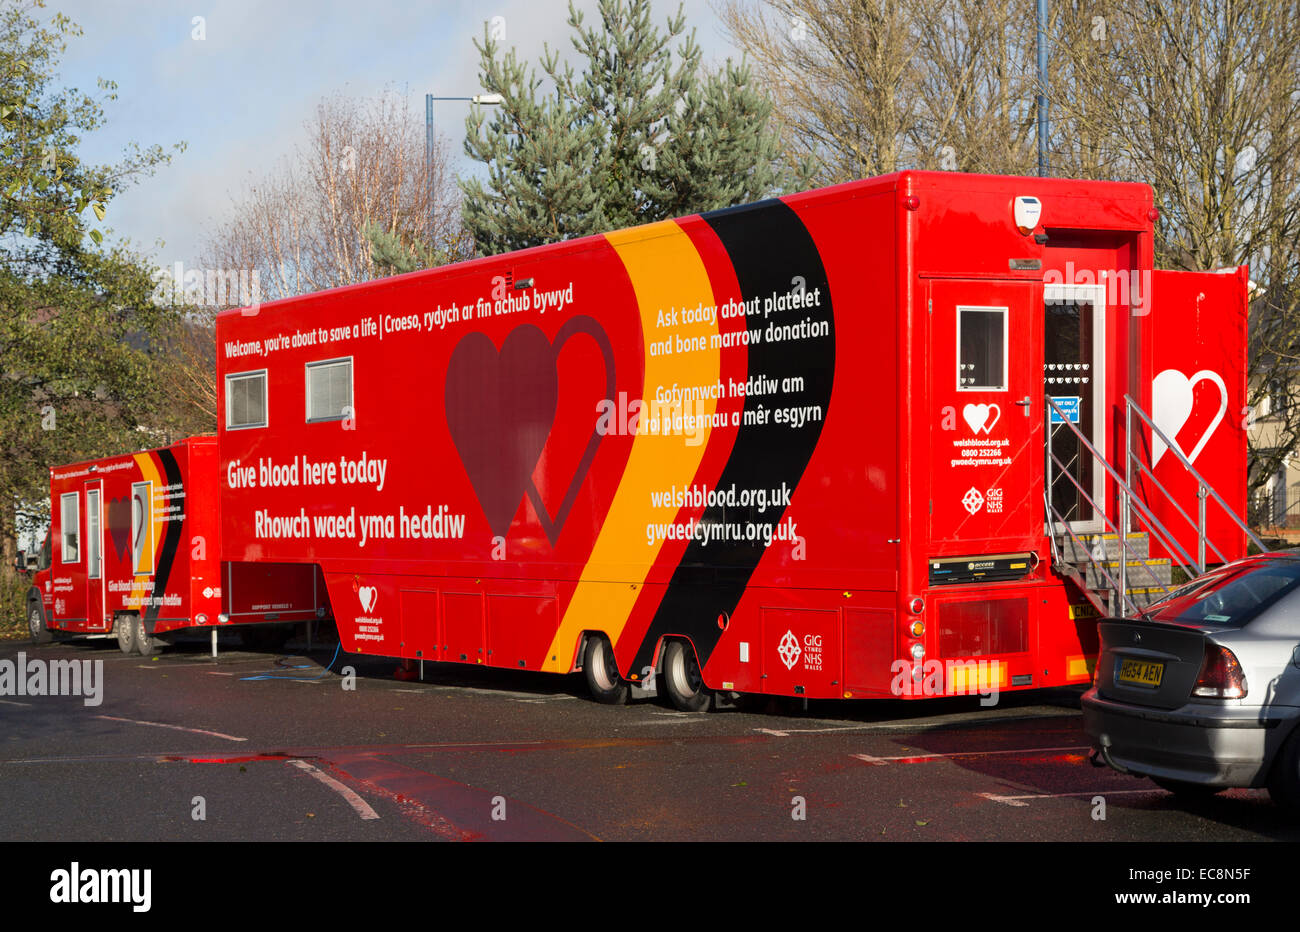 Give blood here today mobile van in English and Welsh, Abergavenny, Wales, UK Stock Photo